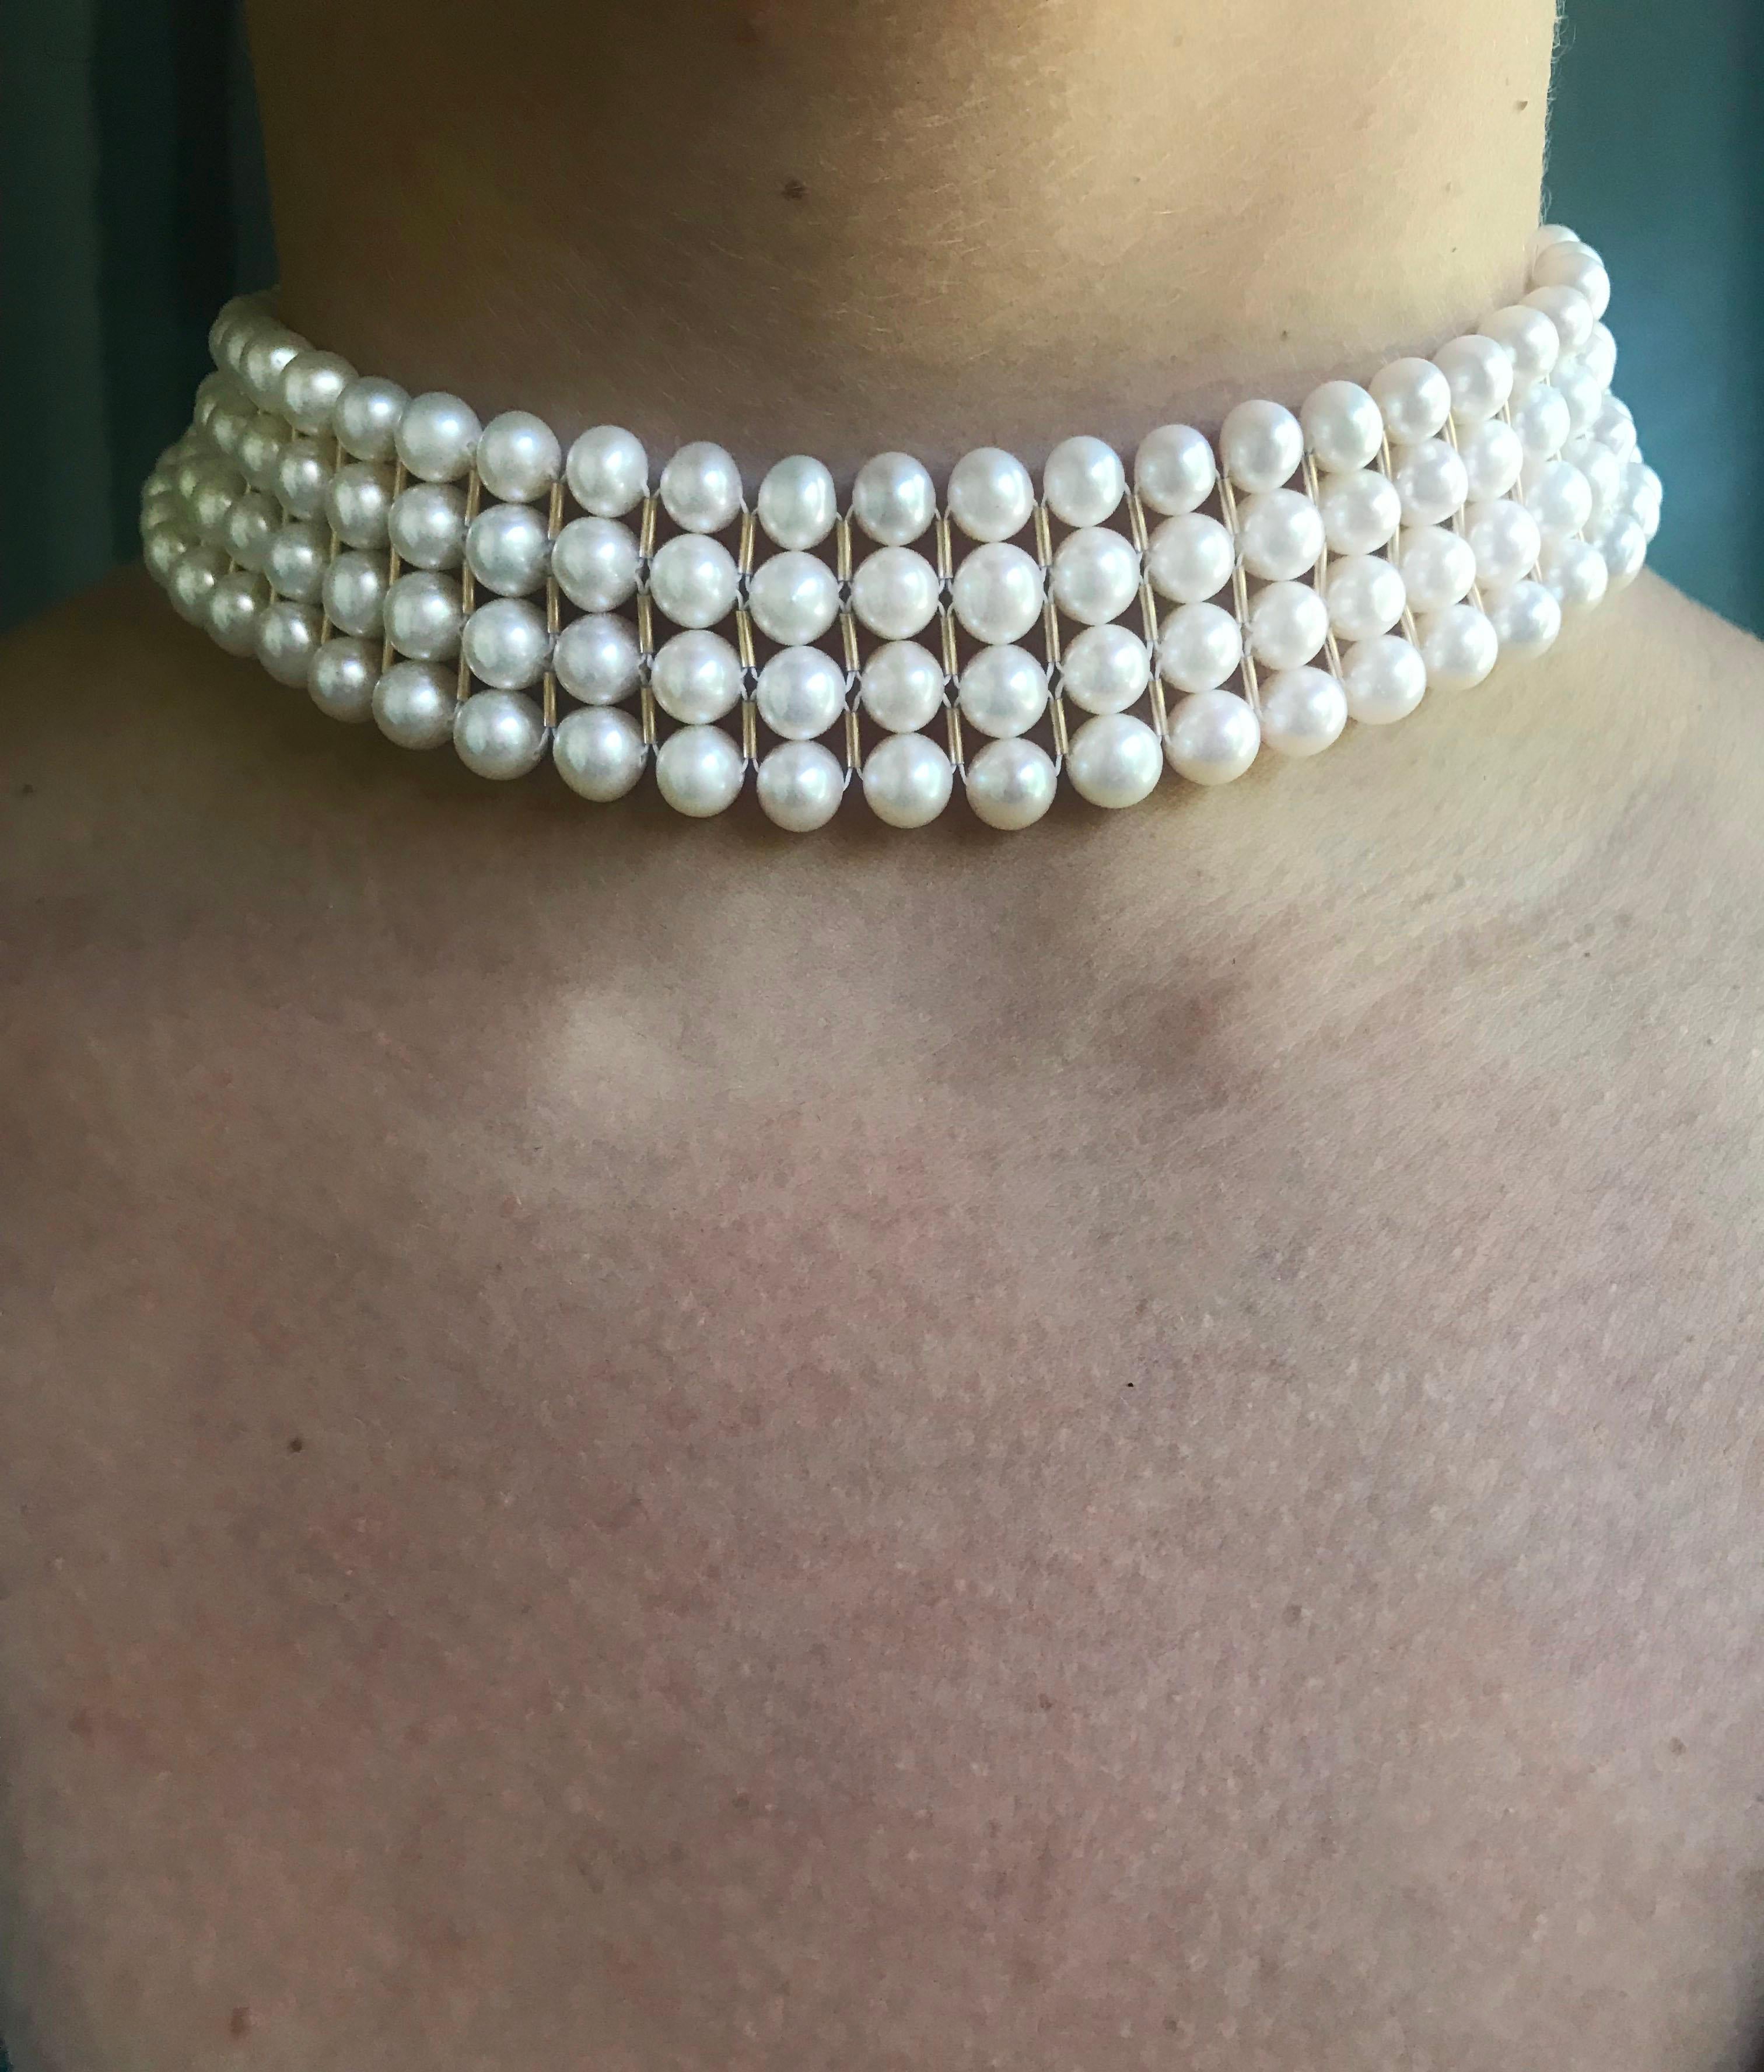 Artist Marina J Bridal Woven White Pearl Choker with secure sliding clasp